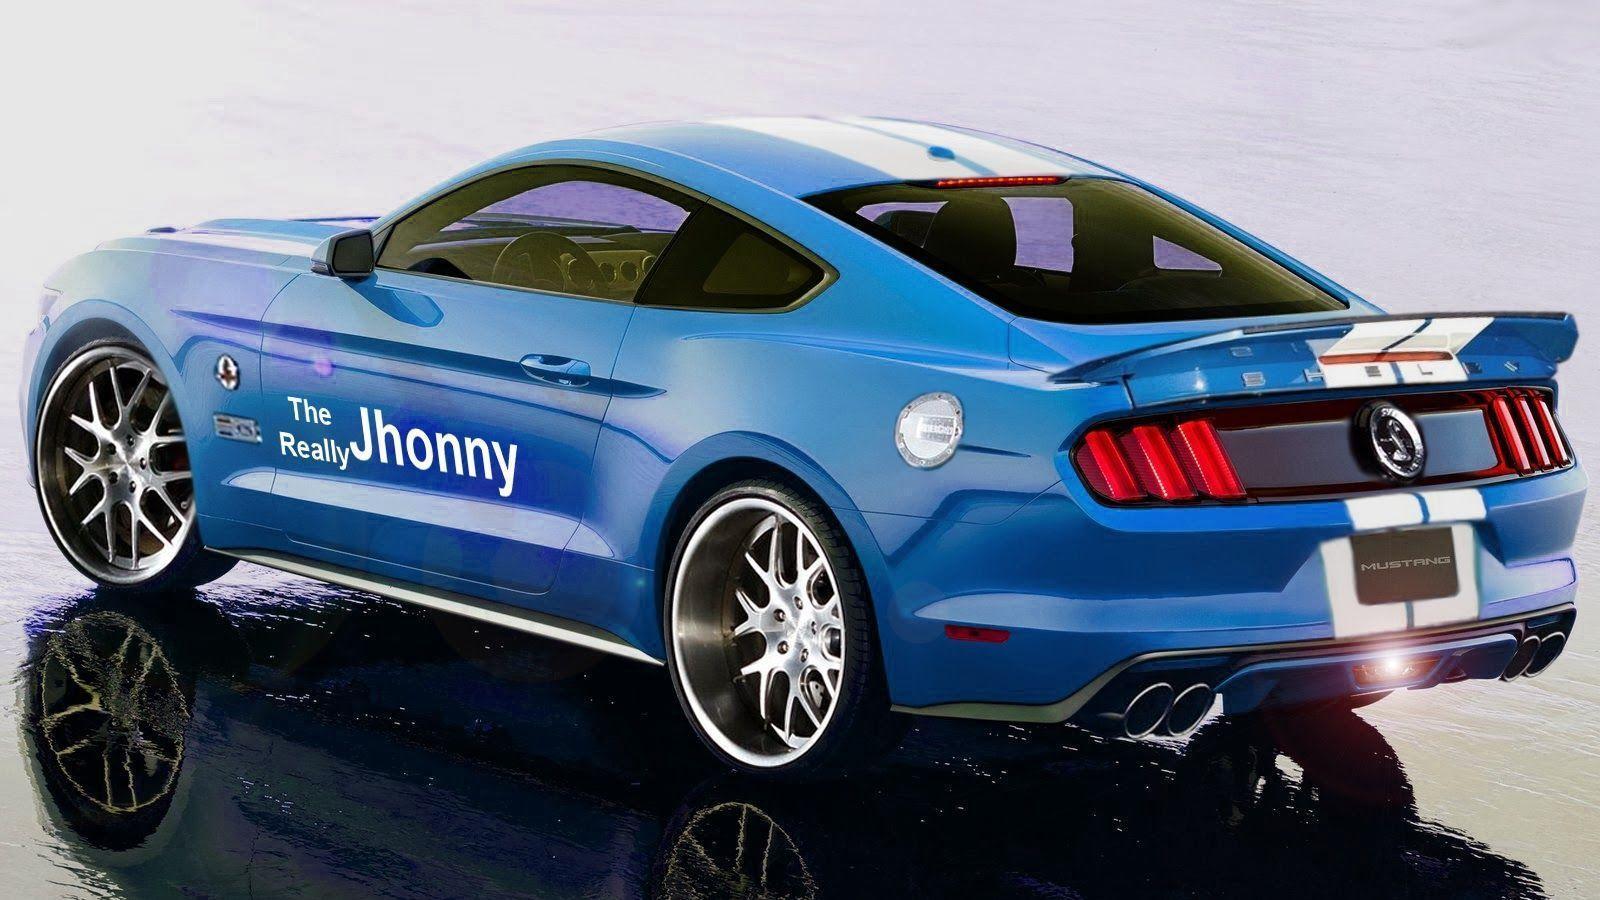 Ford Mustang Shelby HD Wallpaper Download. CarsWallpaper